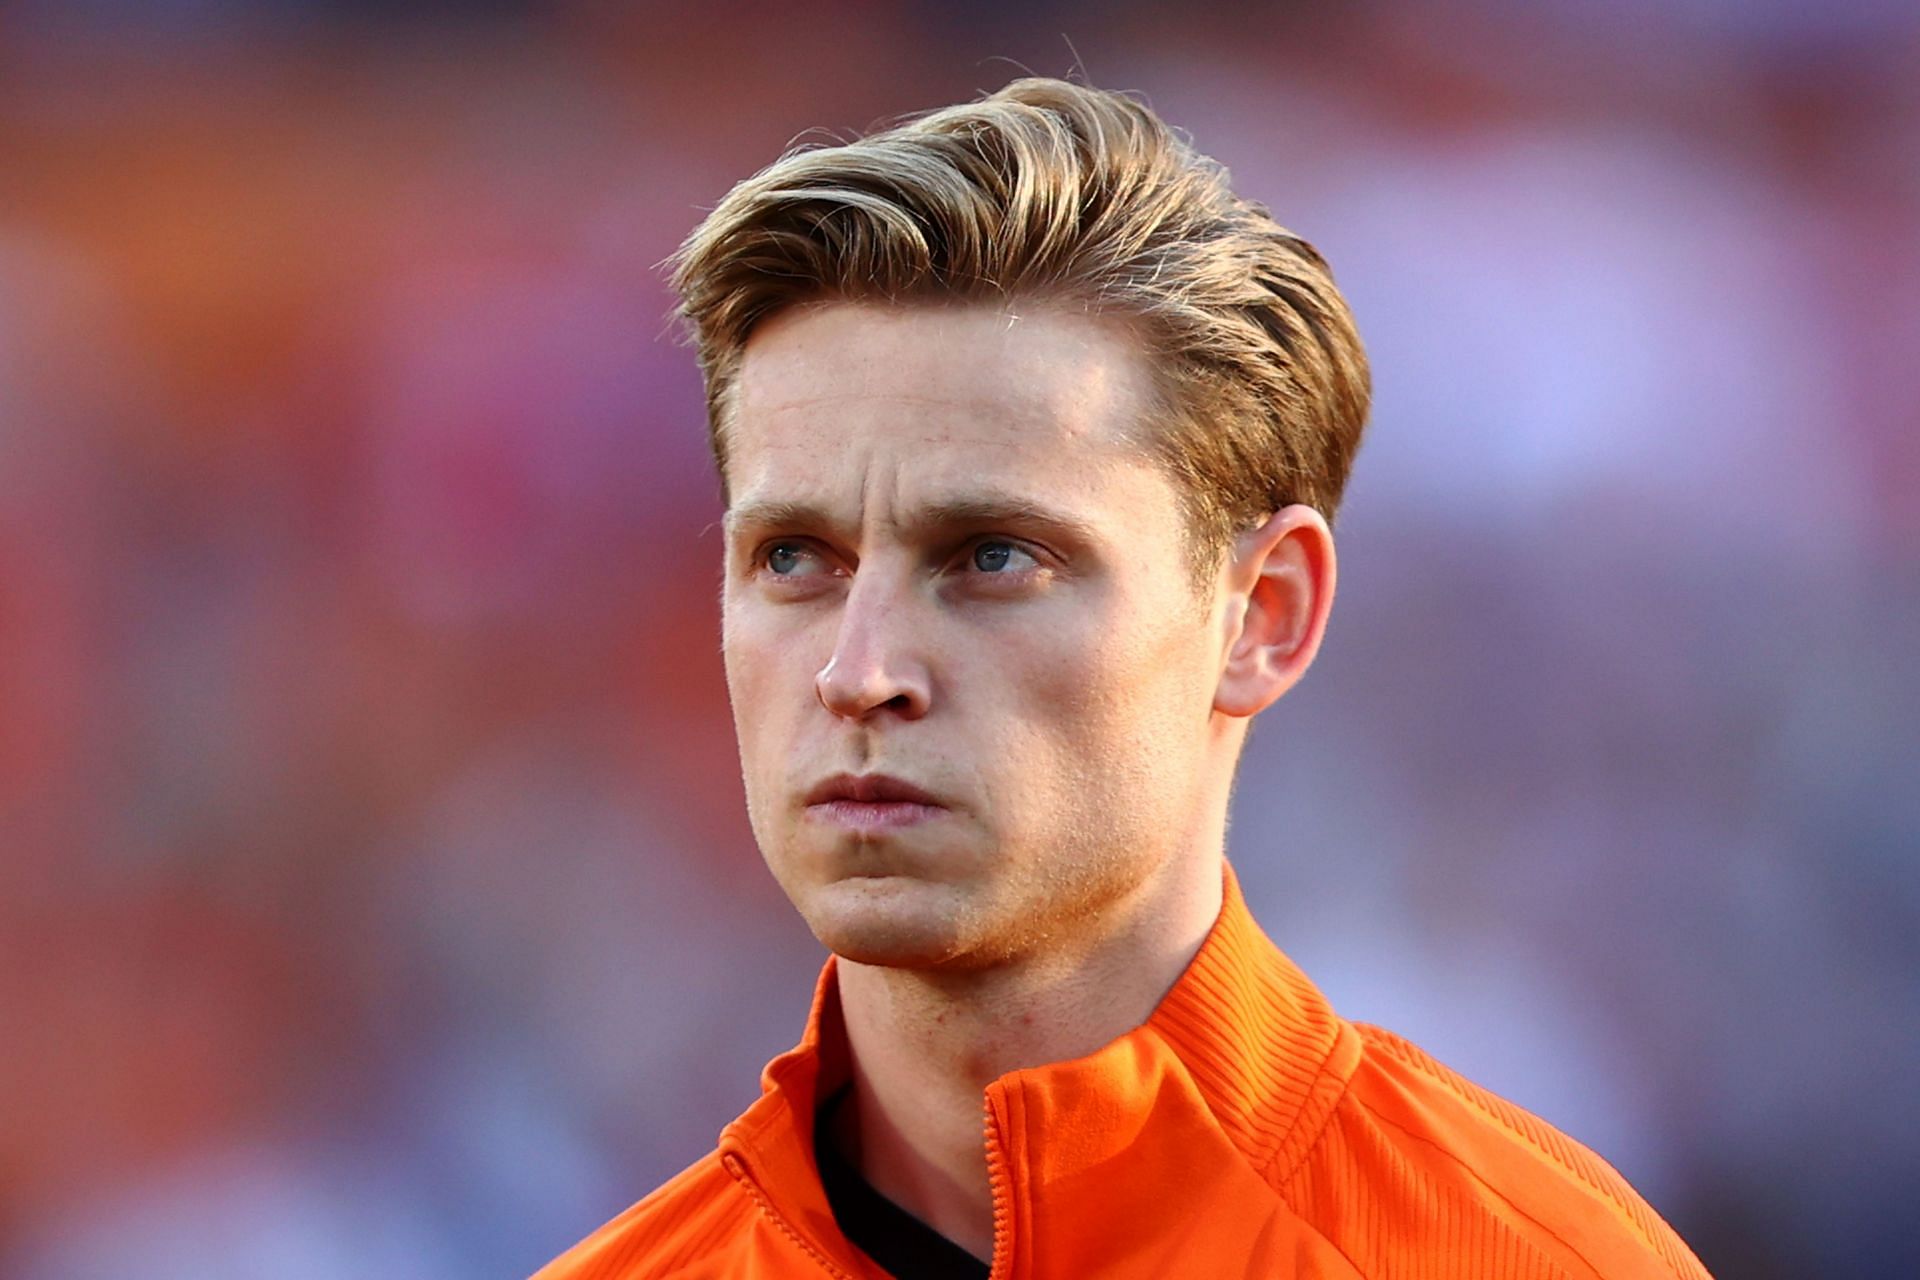 Manchester United are working to sign Frenkie de Jong